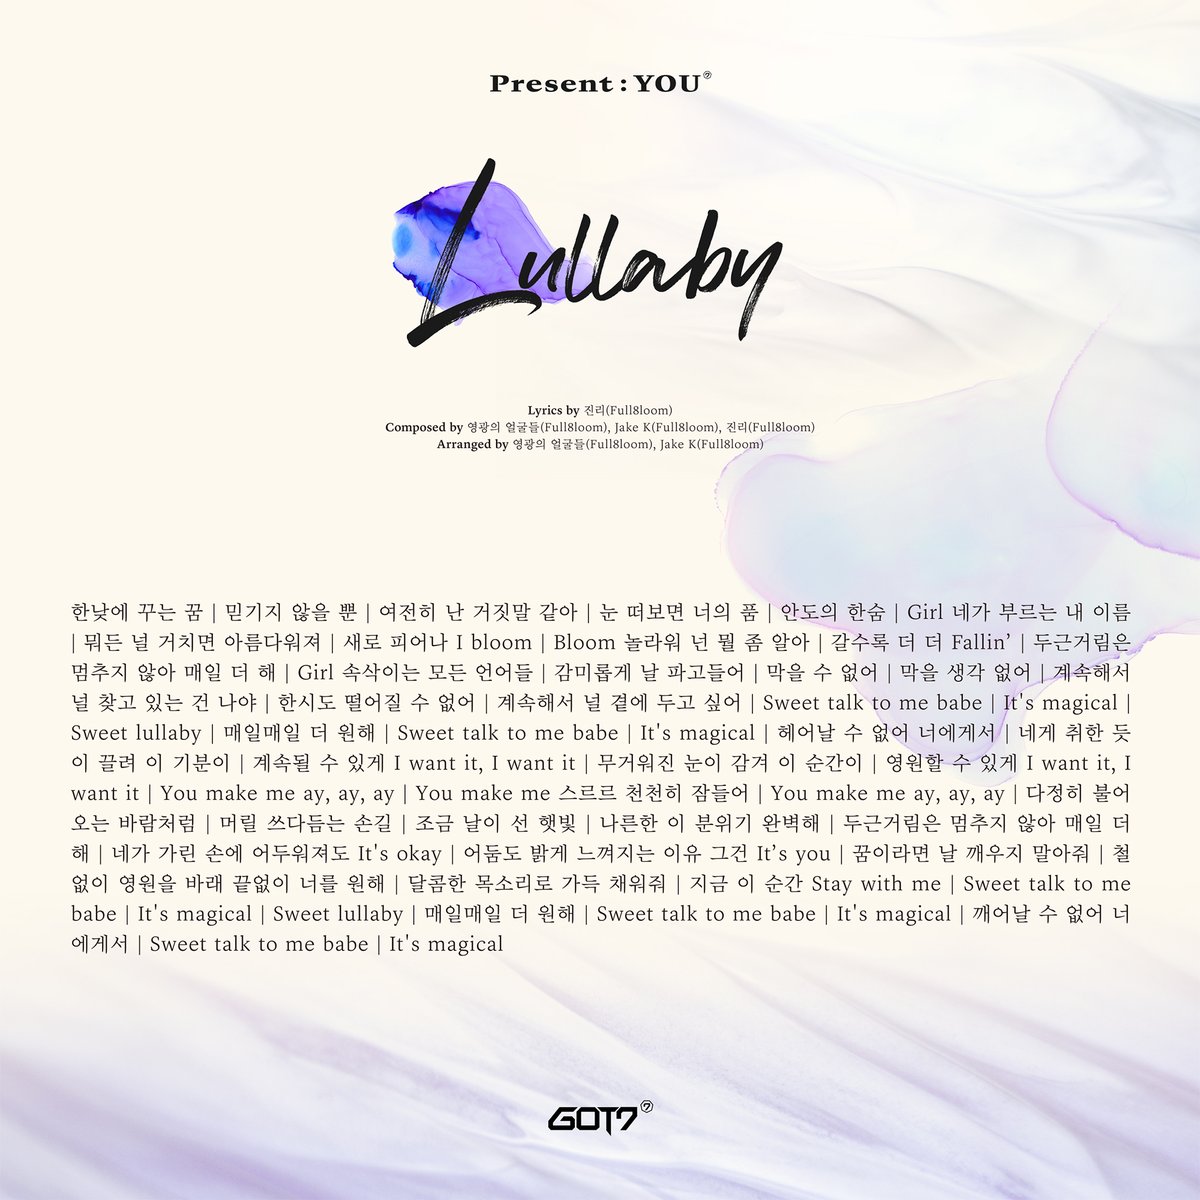 Come and get your текст. Got7 Lullaby. Lullaby Lyrics. Sweet Lullaby перевод. Lullabies in English text.